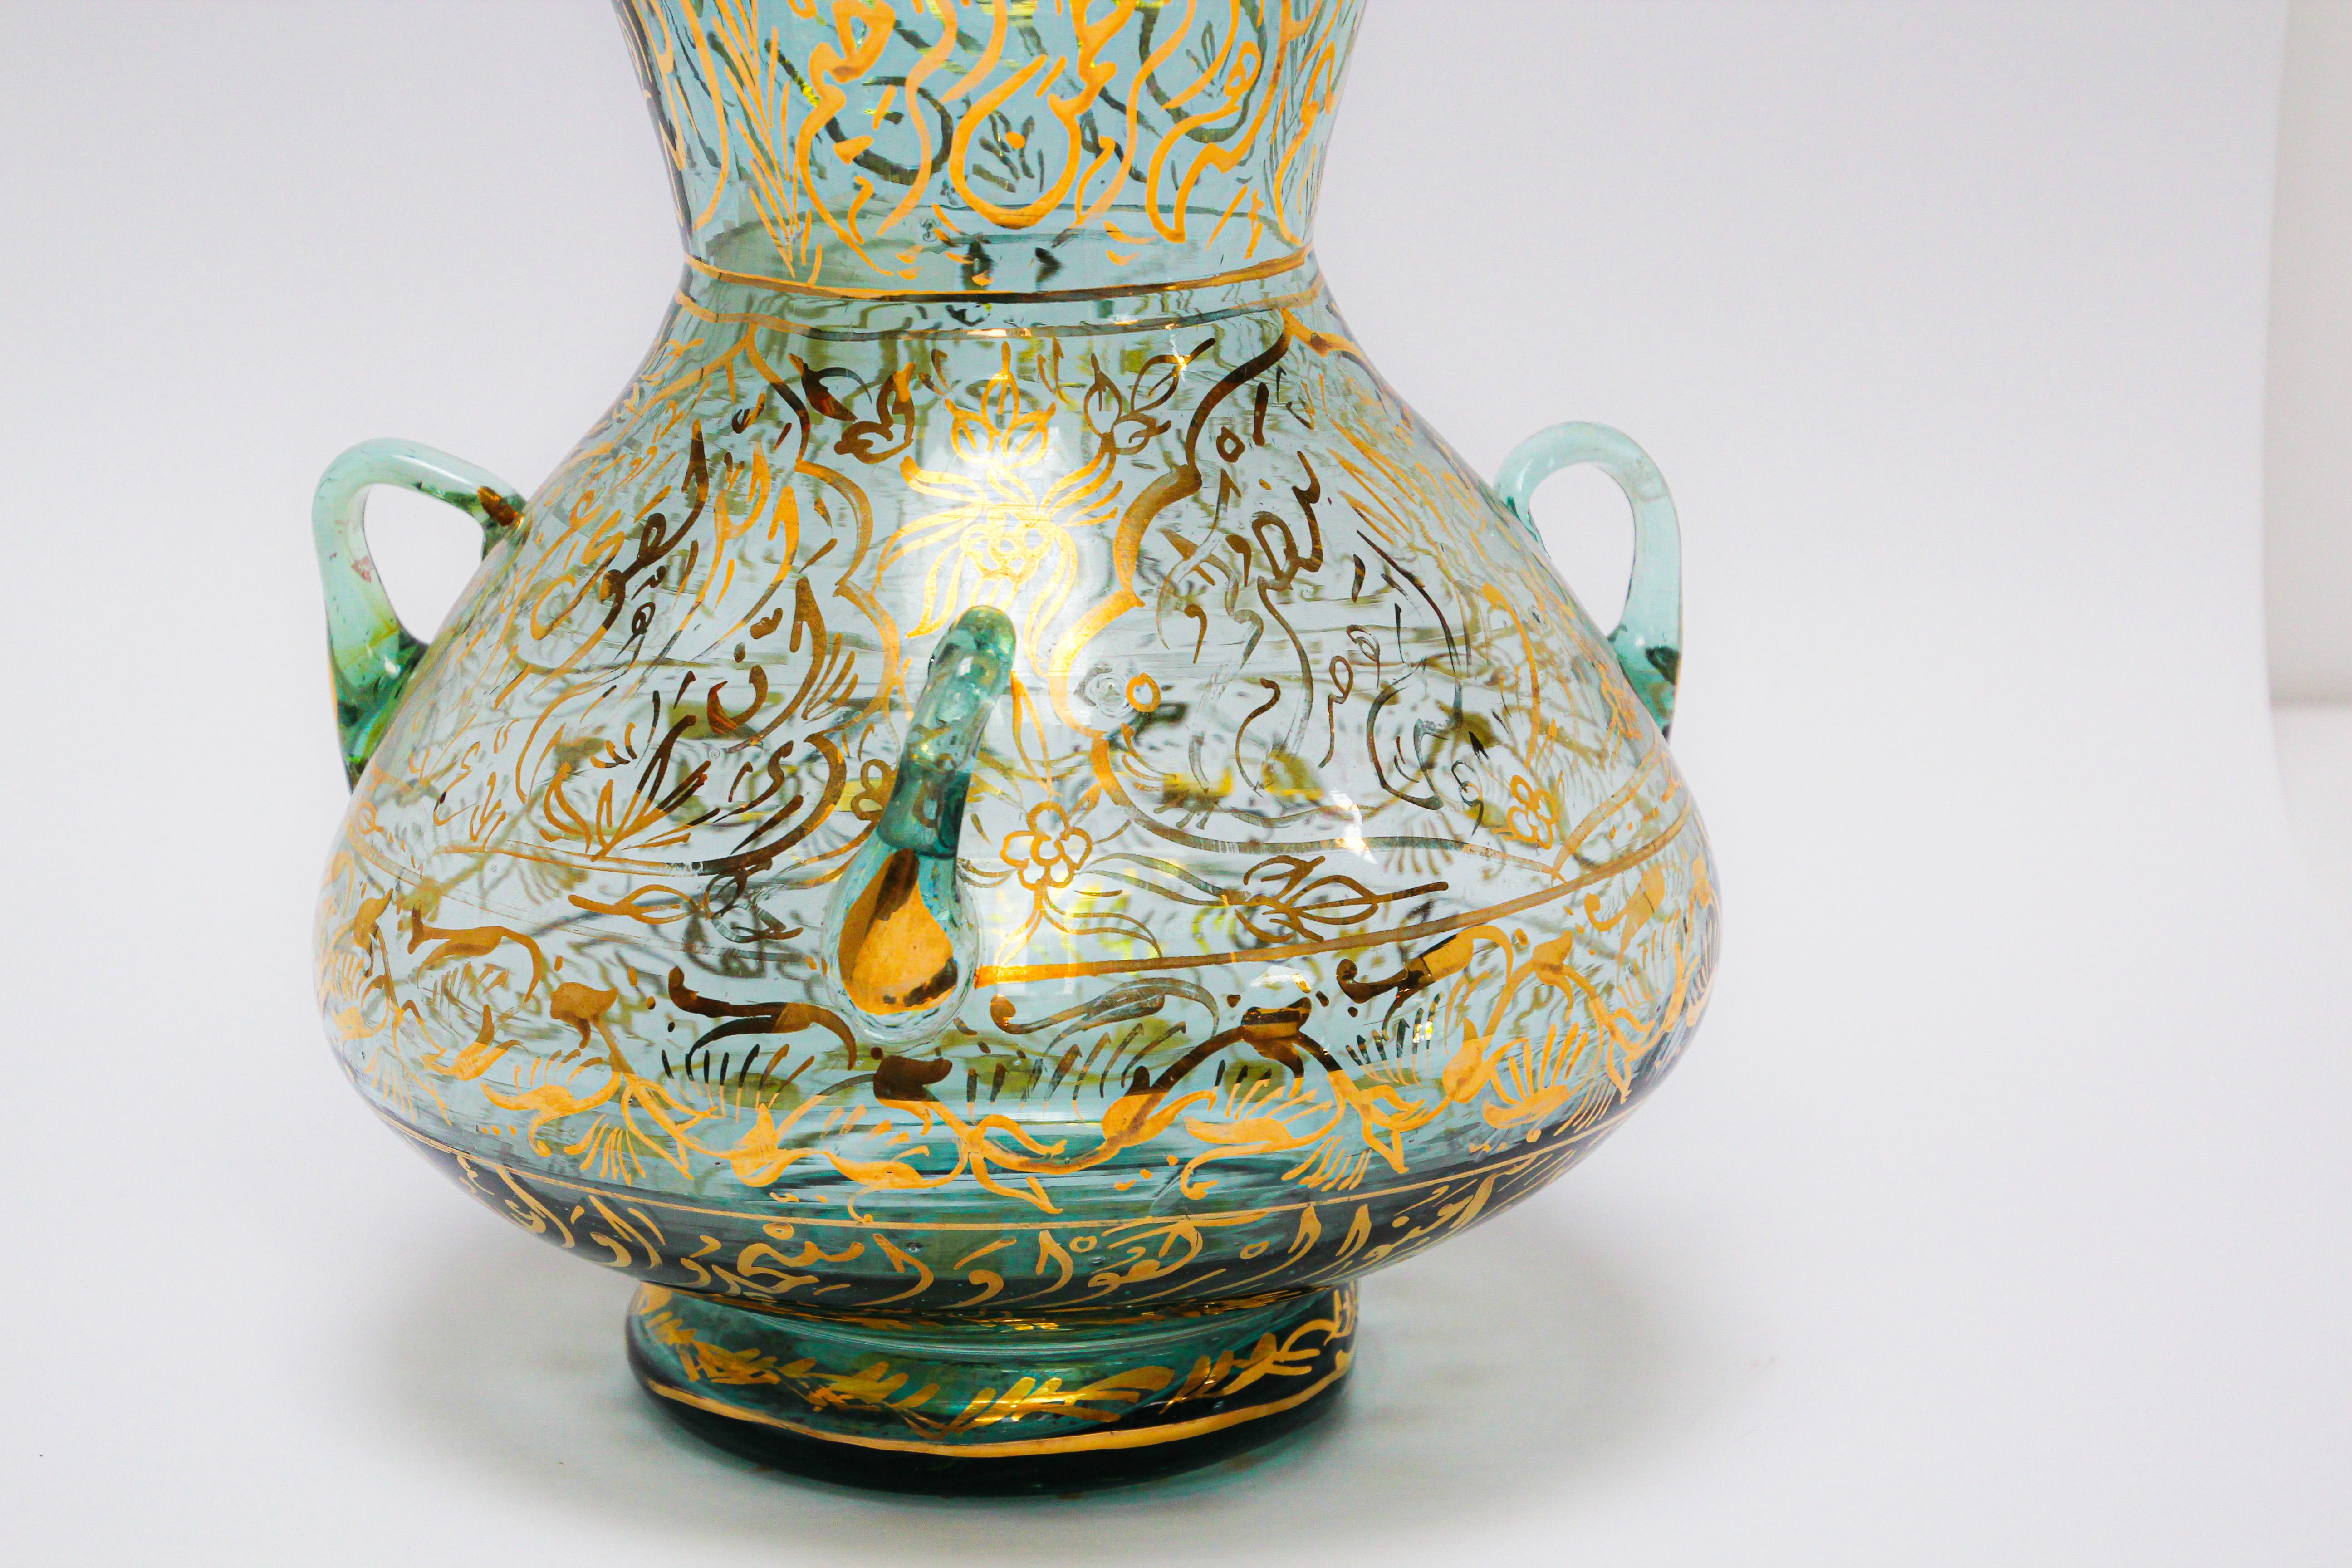 Middle Eastern Mosque lamp in the Islamic tradition, Mameluke style hand painted blown clear glass with gilded calligraphic inscriptions.
Dimensions: 15in. height x 11in. diameter, mouth opening 9.5in.
These were used as oil lamps.
Large round